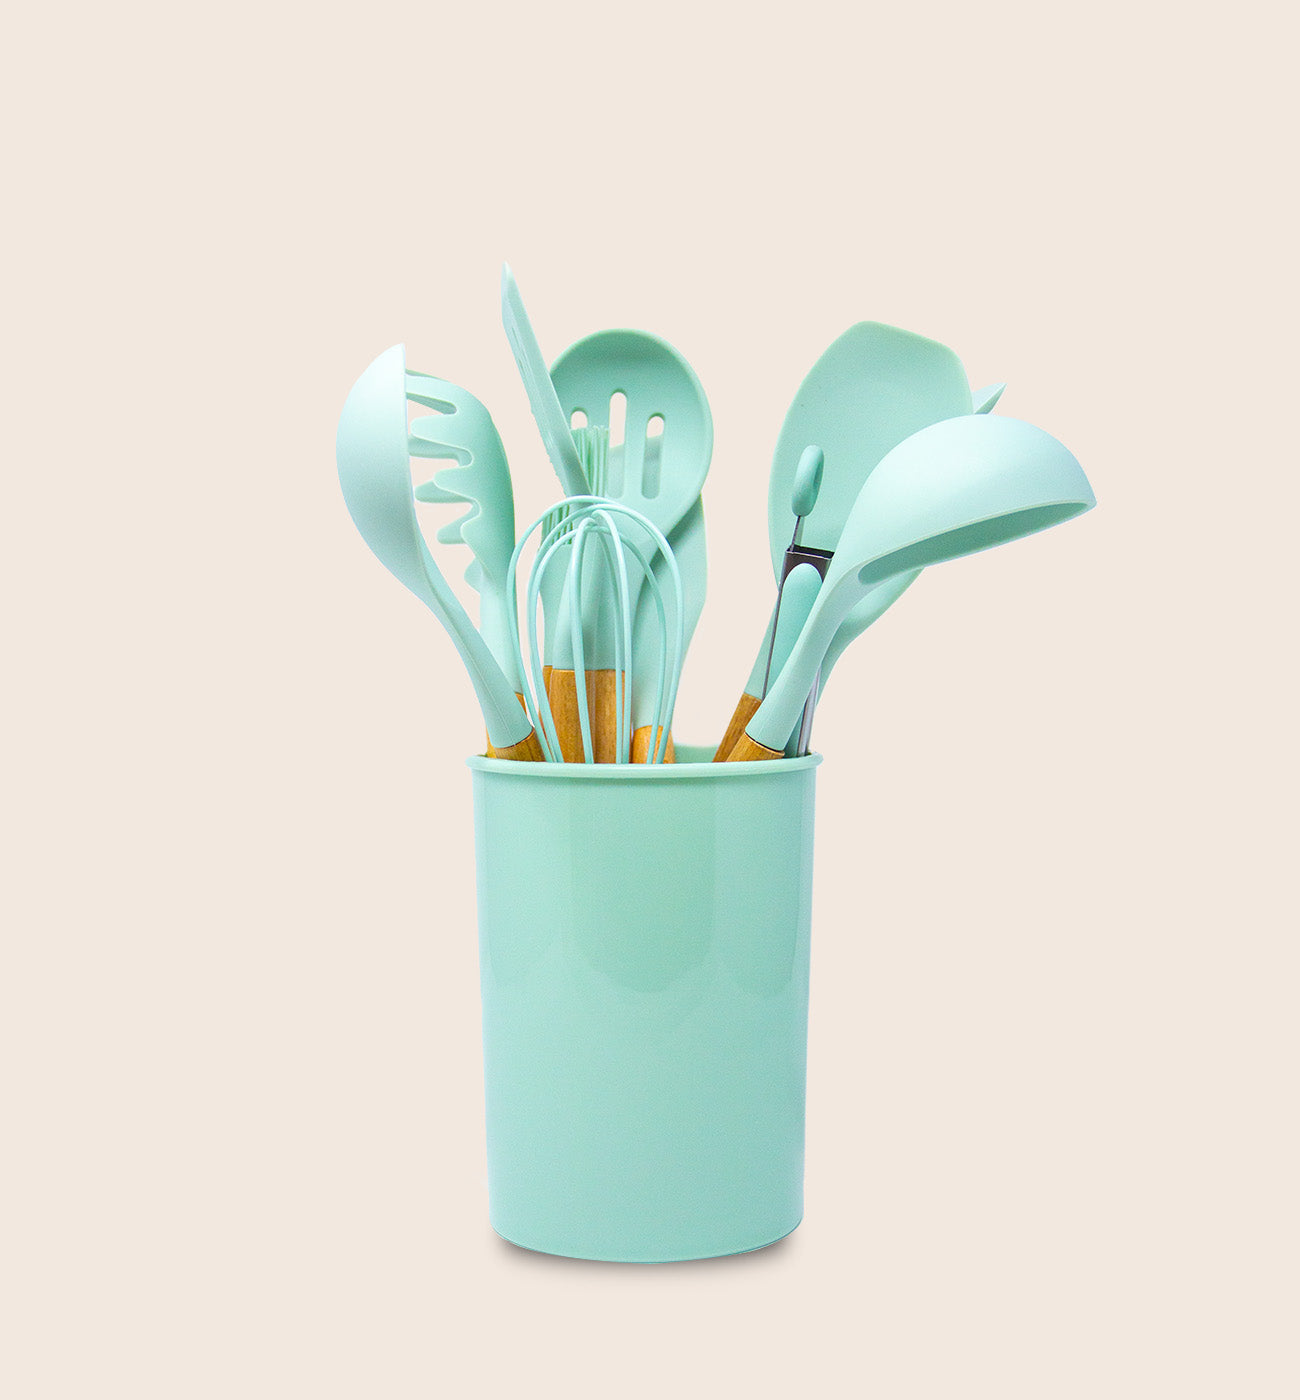 9 Piece Mint Green Colored Silicone Kitchen Utensils Set with Wooden Handles